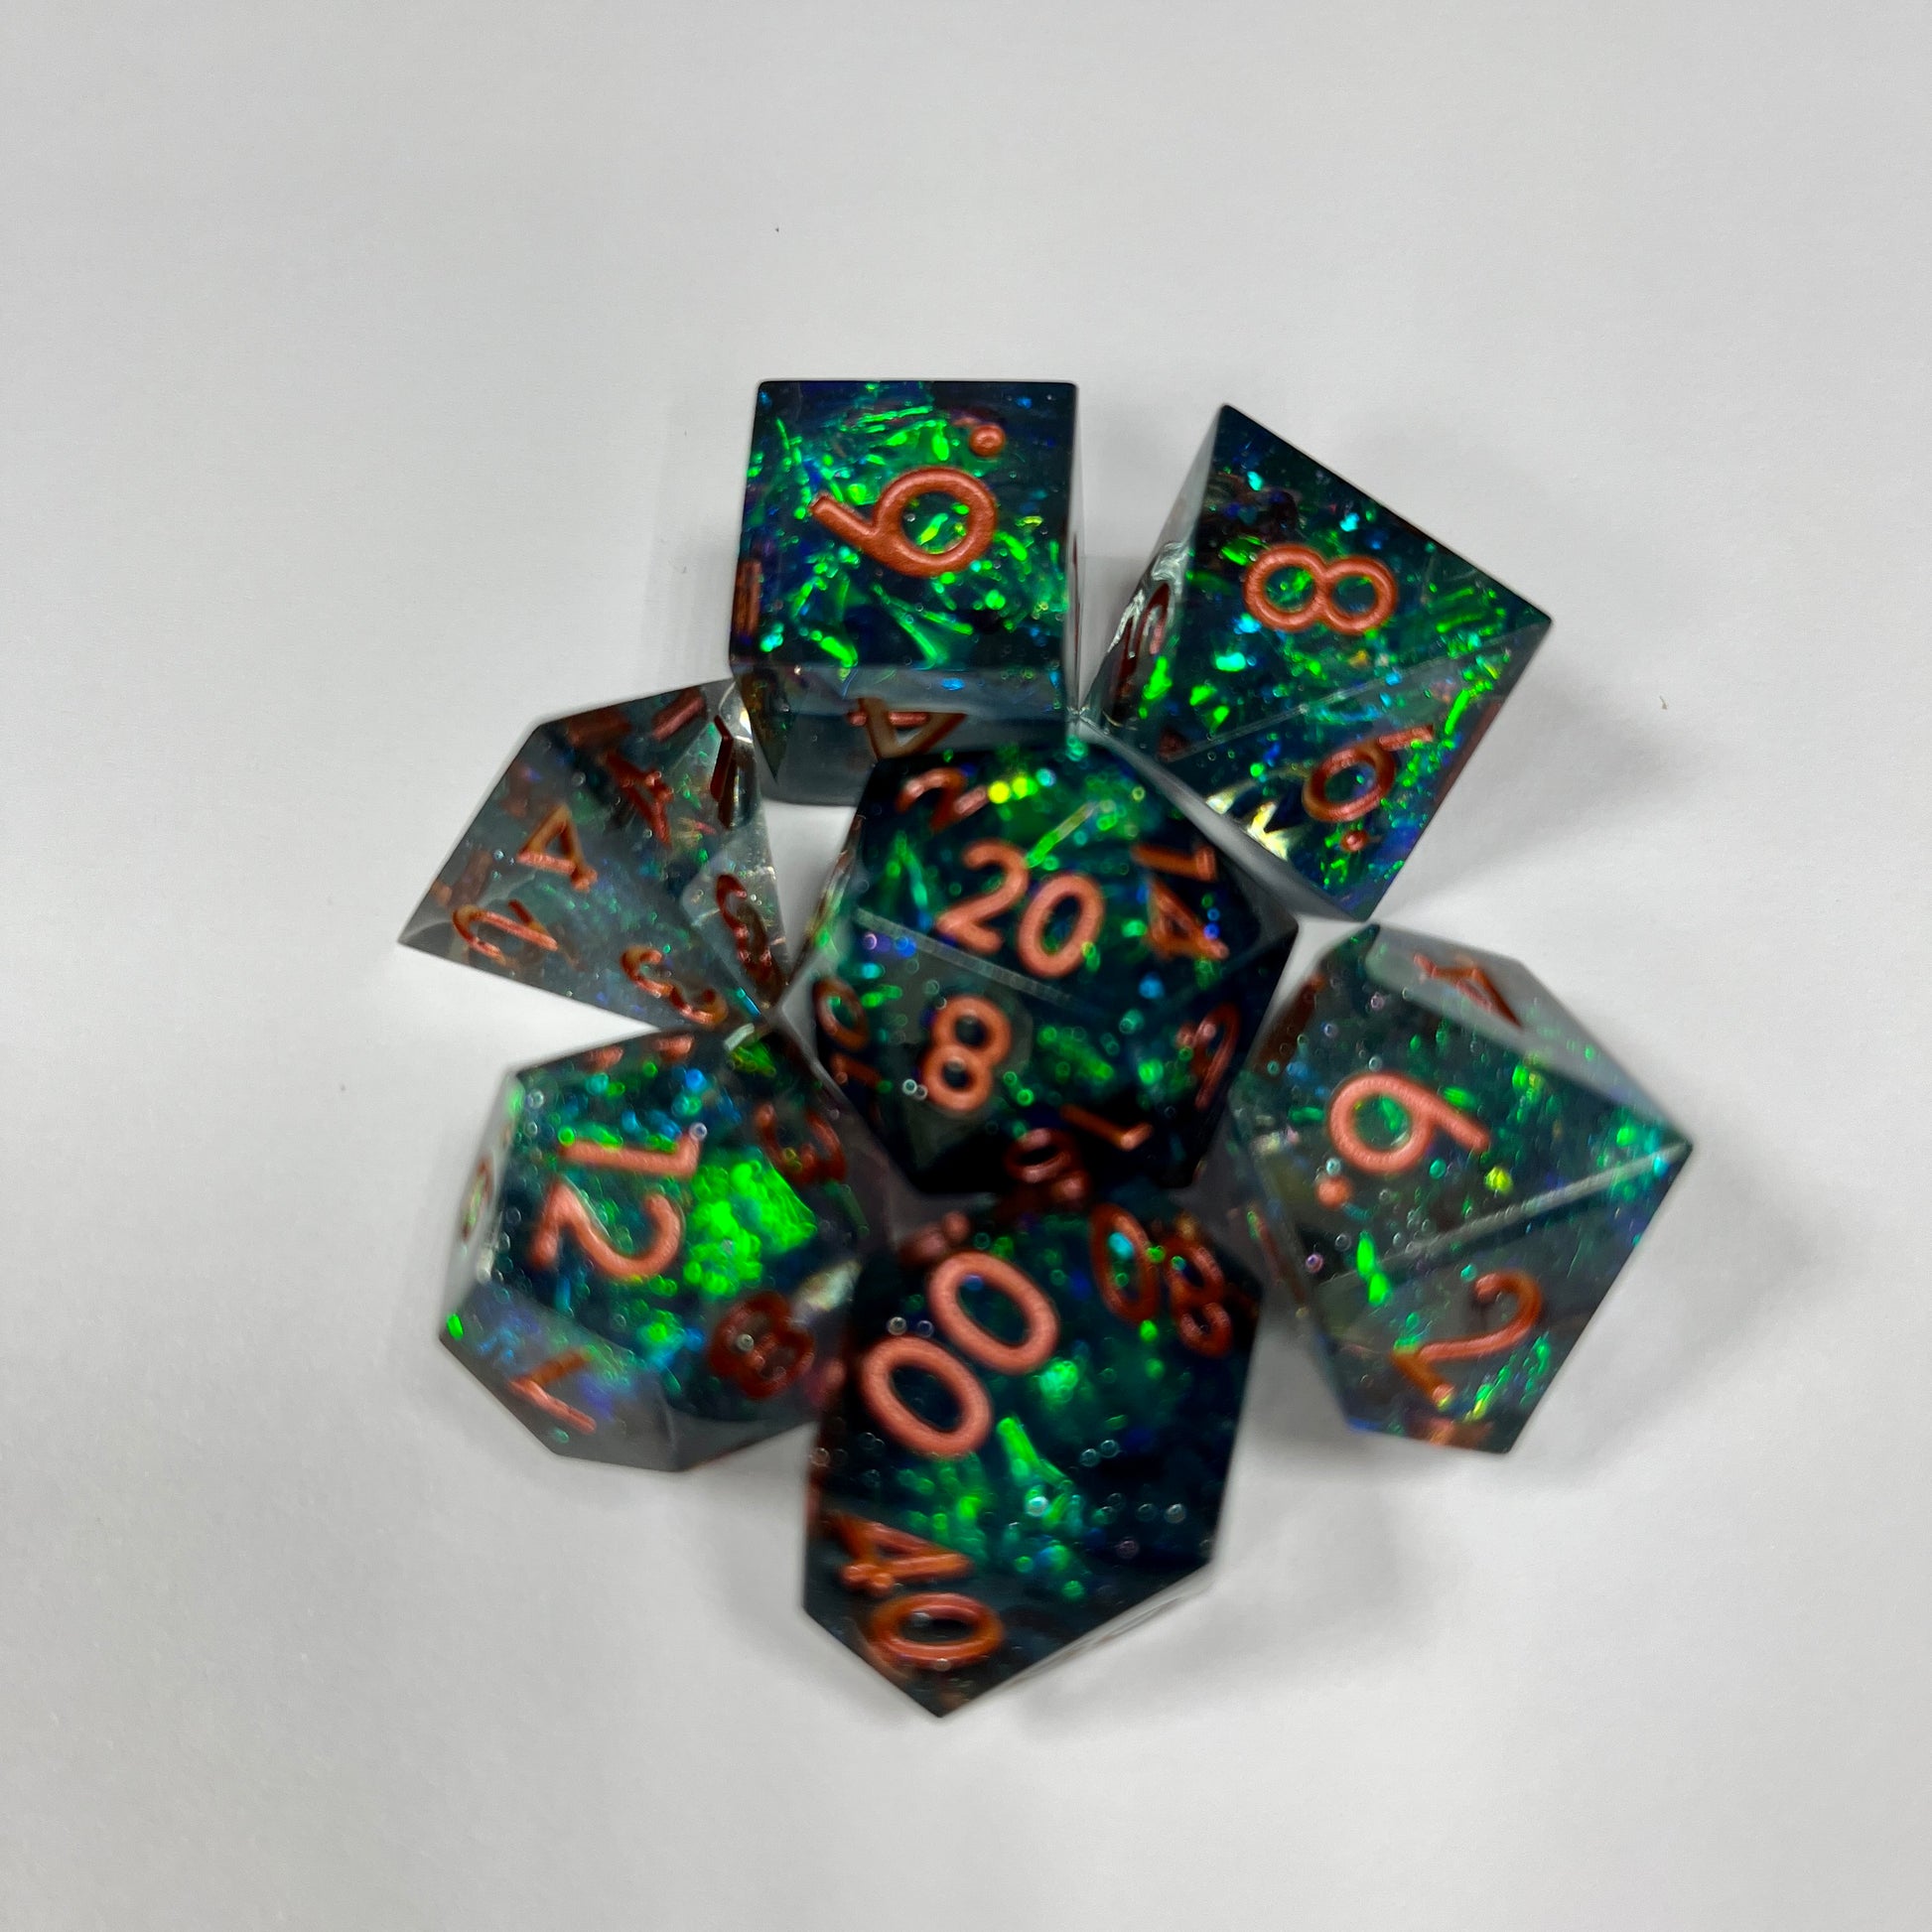 Sharp edge polyhedral shiny math rocks for RPG role playing games and dice goblin collectors